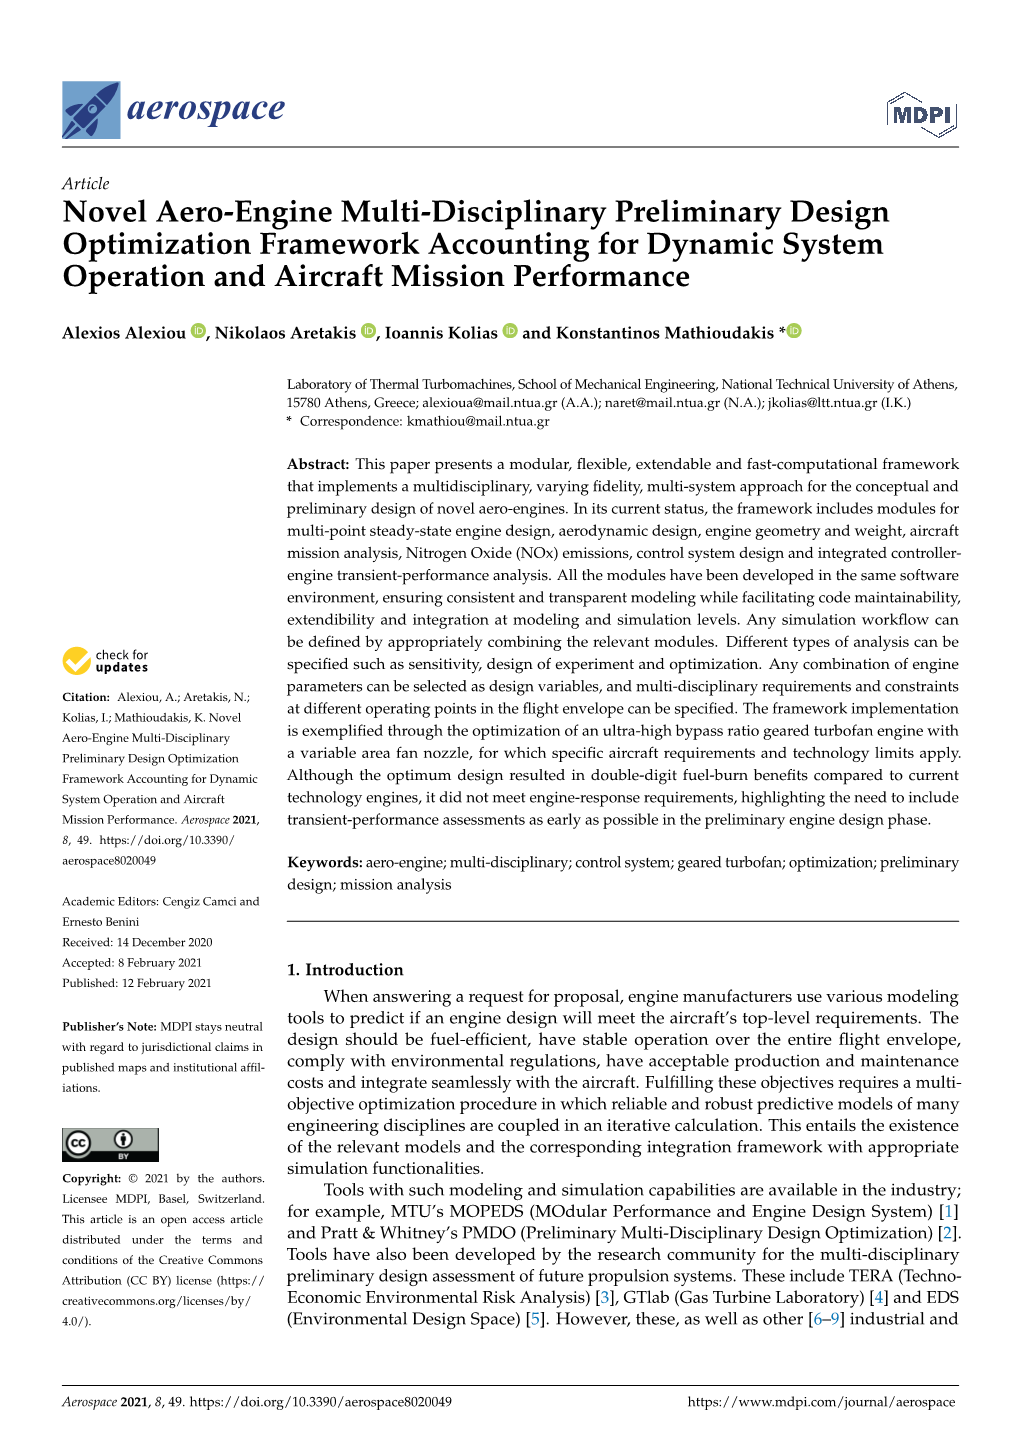 Novel Aero-Engine Multi-Disciplinary Preliminary Design Optimization Framework Accounting for Dynamic System Operation and Aircraft Mission Performance